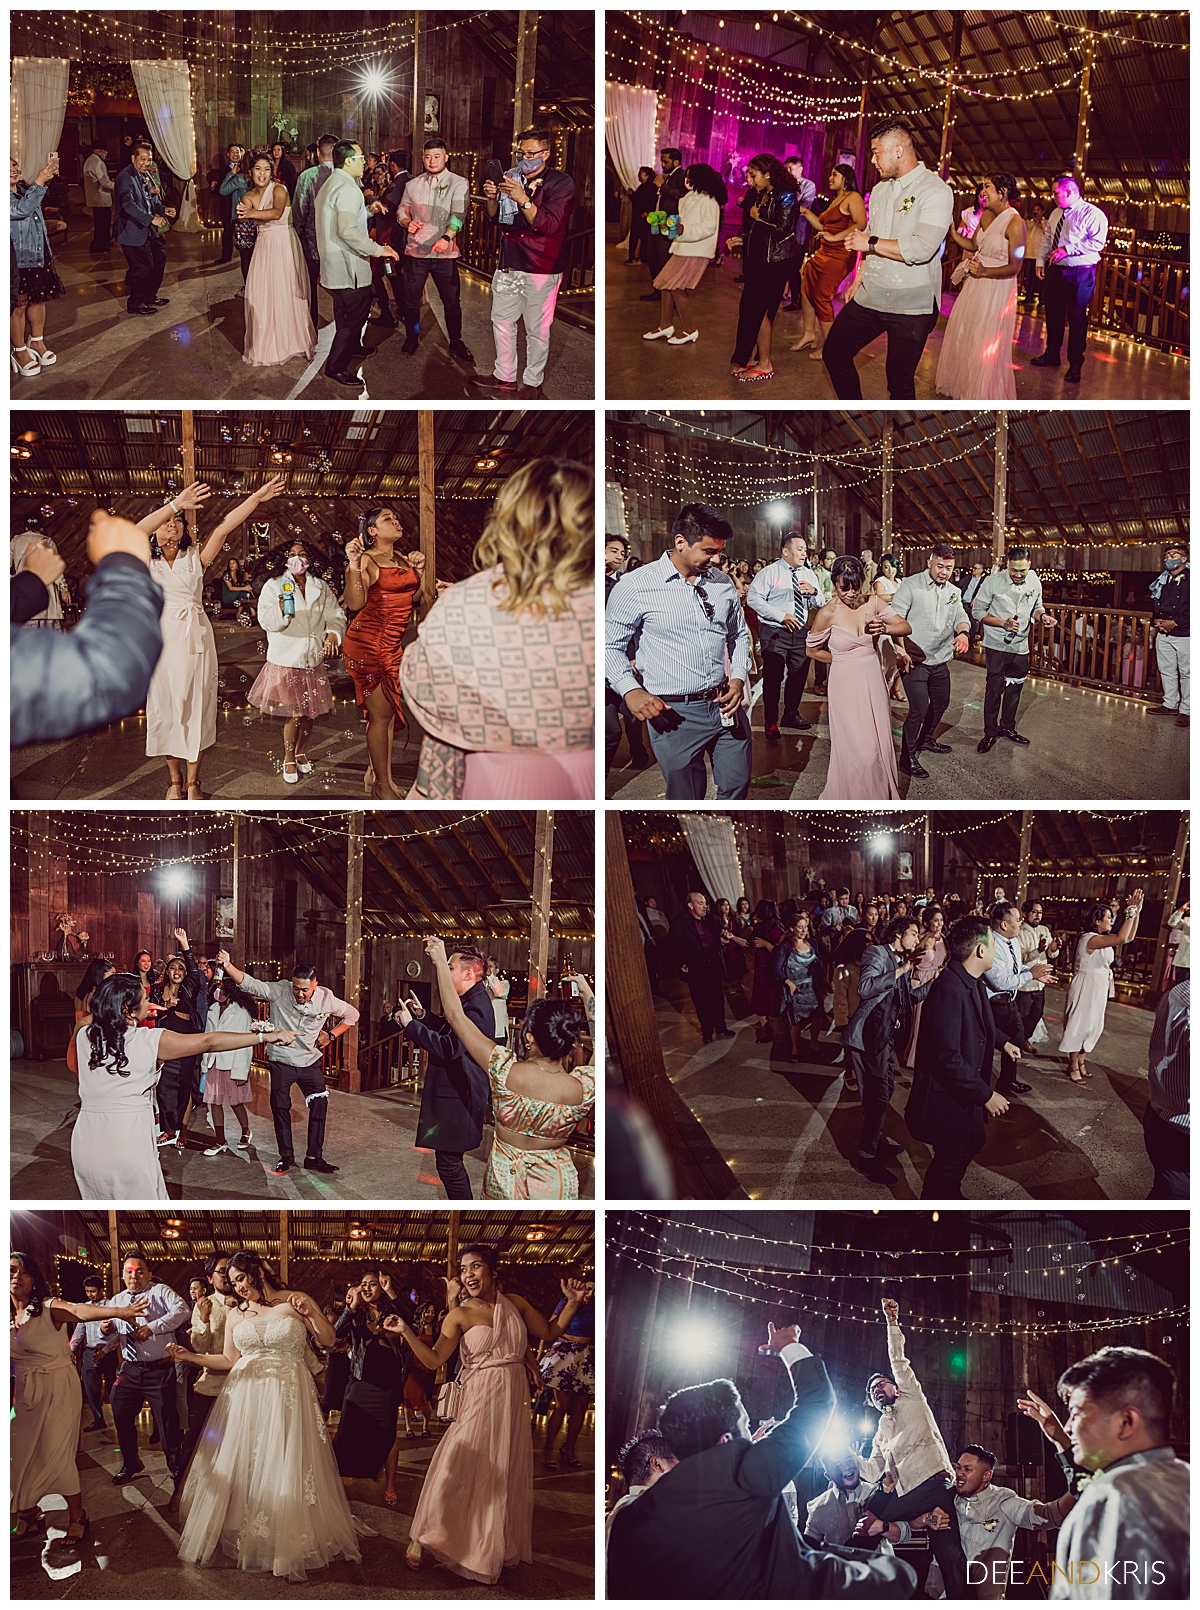 Eight images of guests dancing at reception.